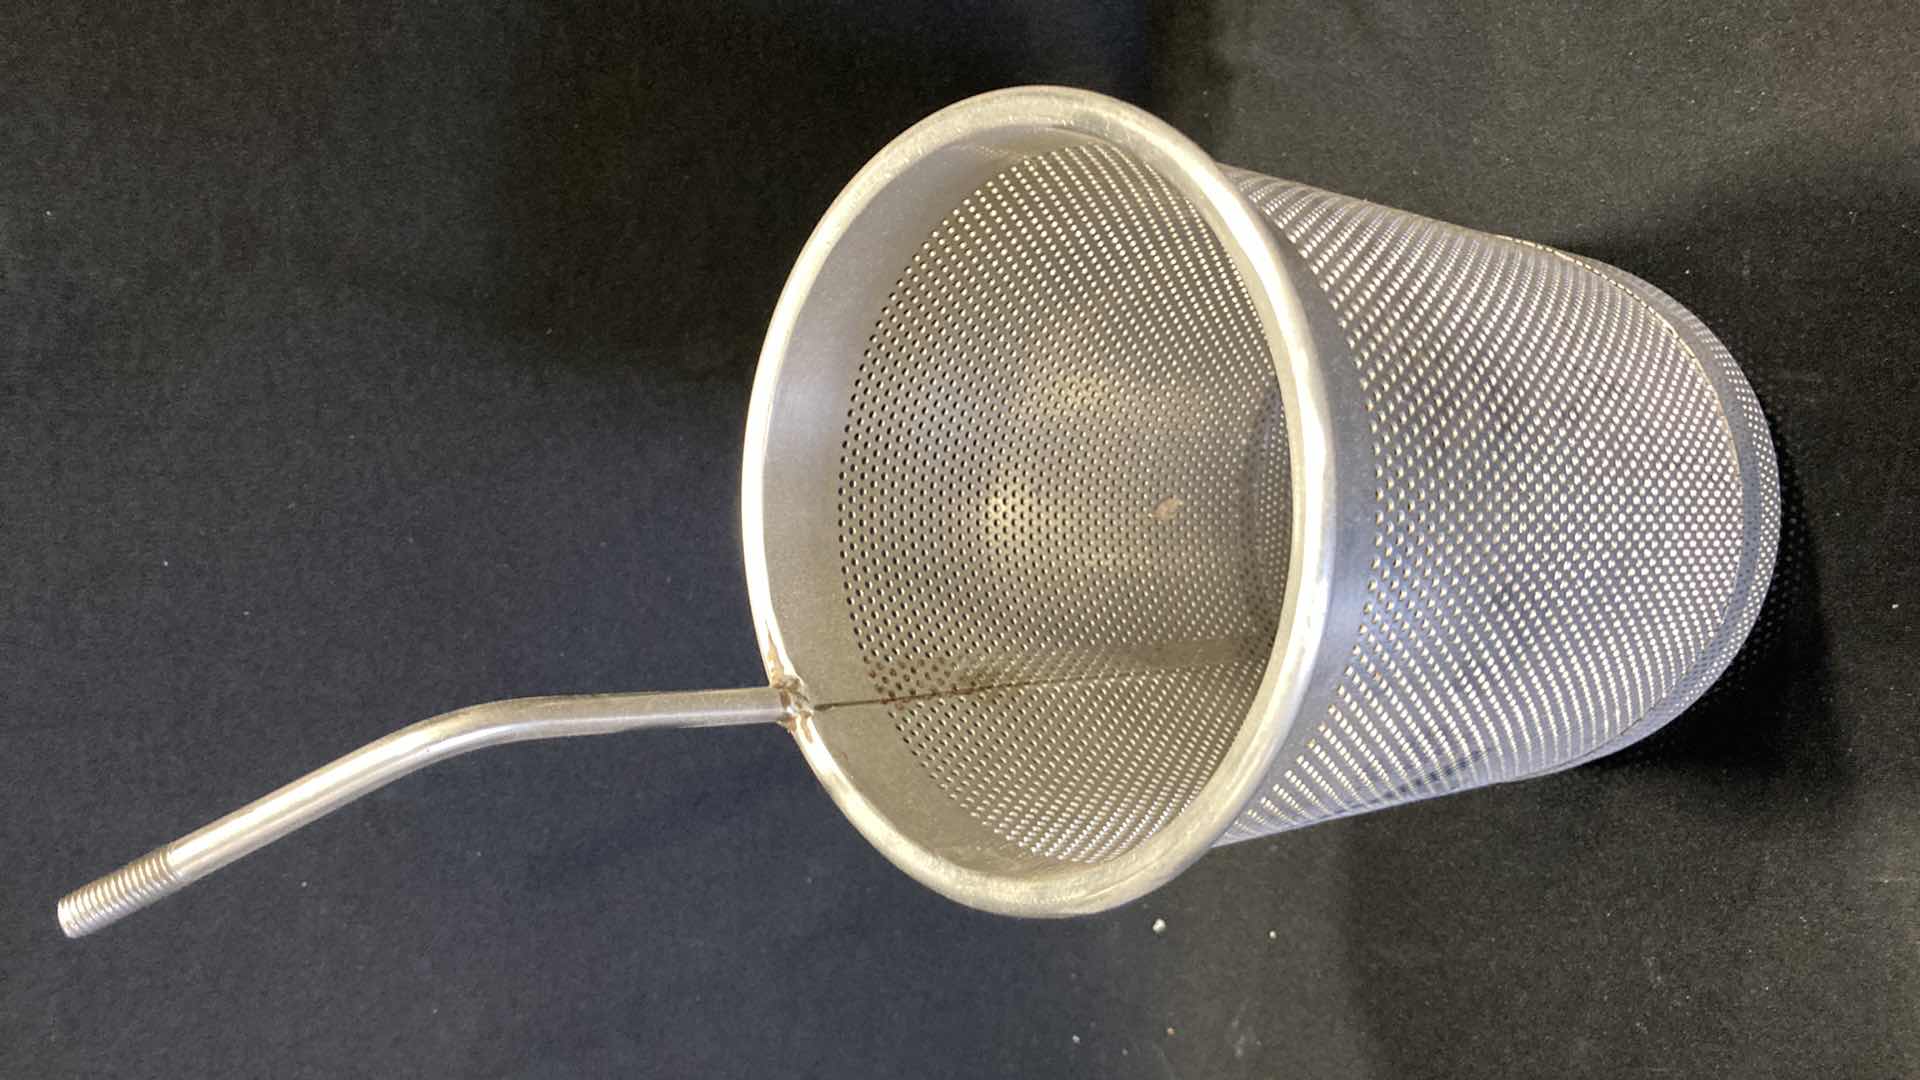 Photo 2 of STAINLESS STEEL PASTA COOKING BASKET 5.75” X 12.5”